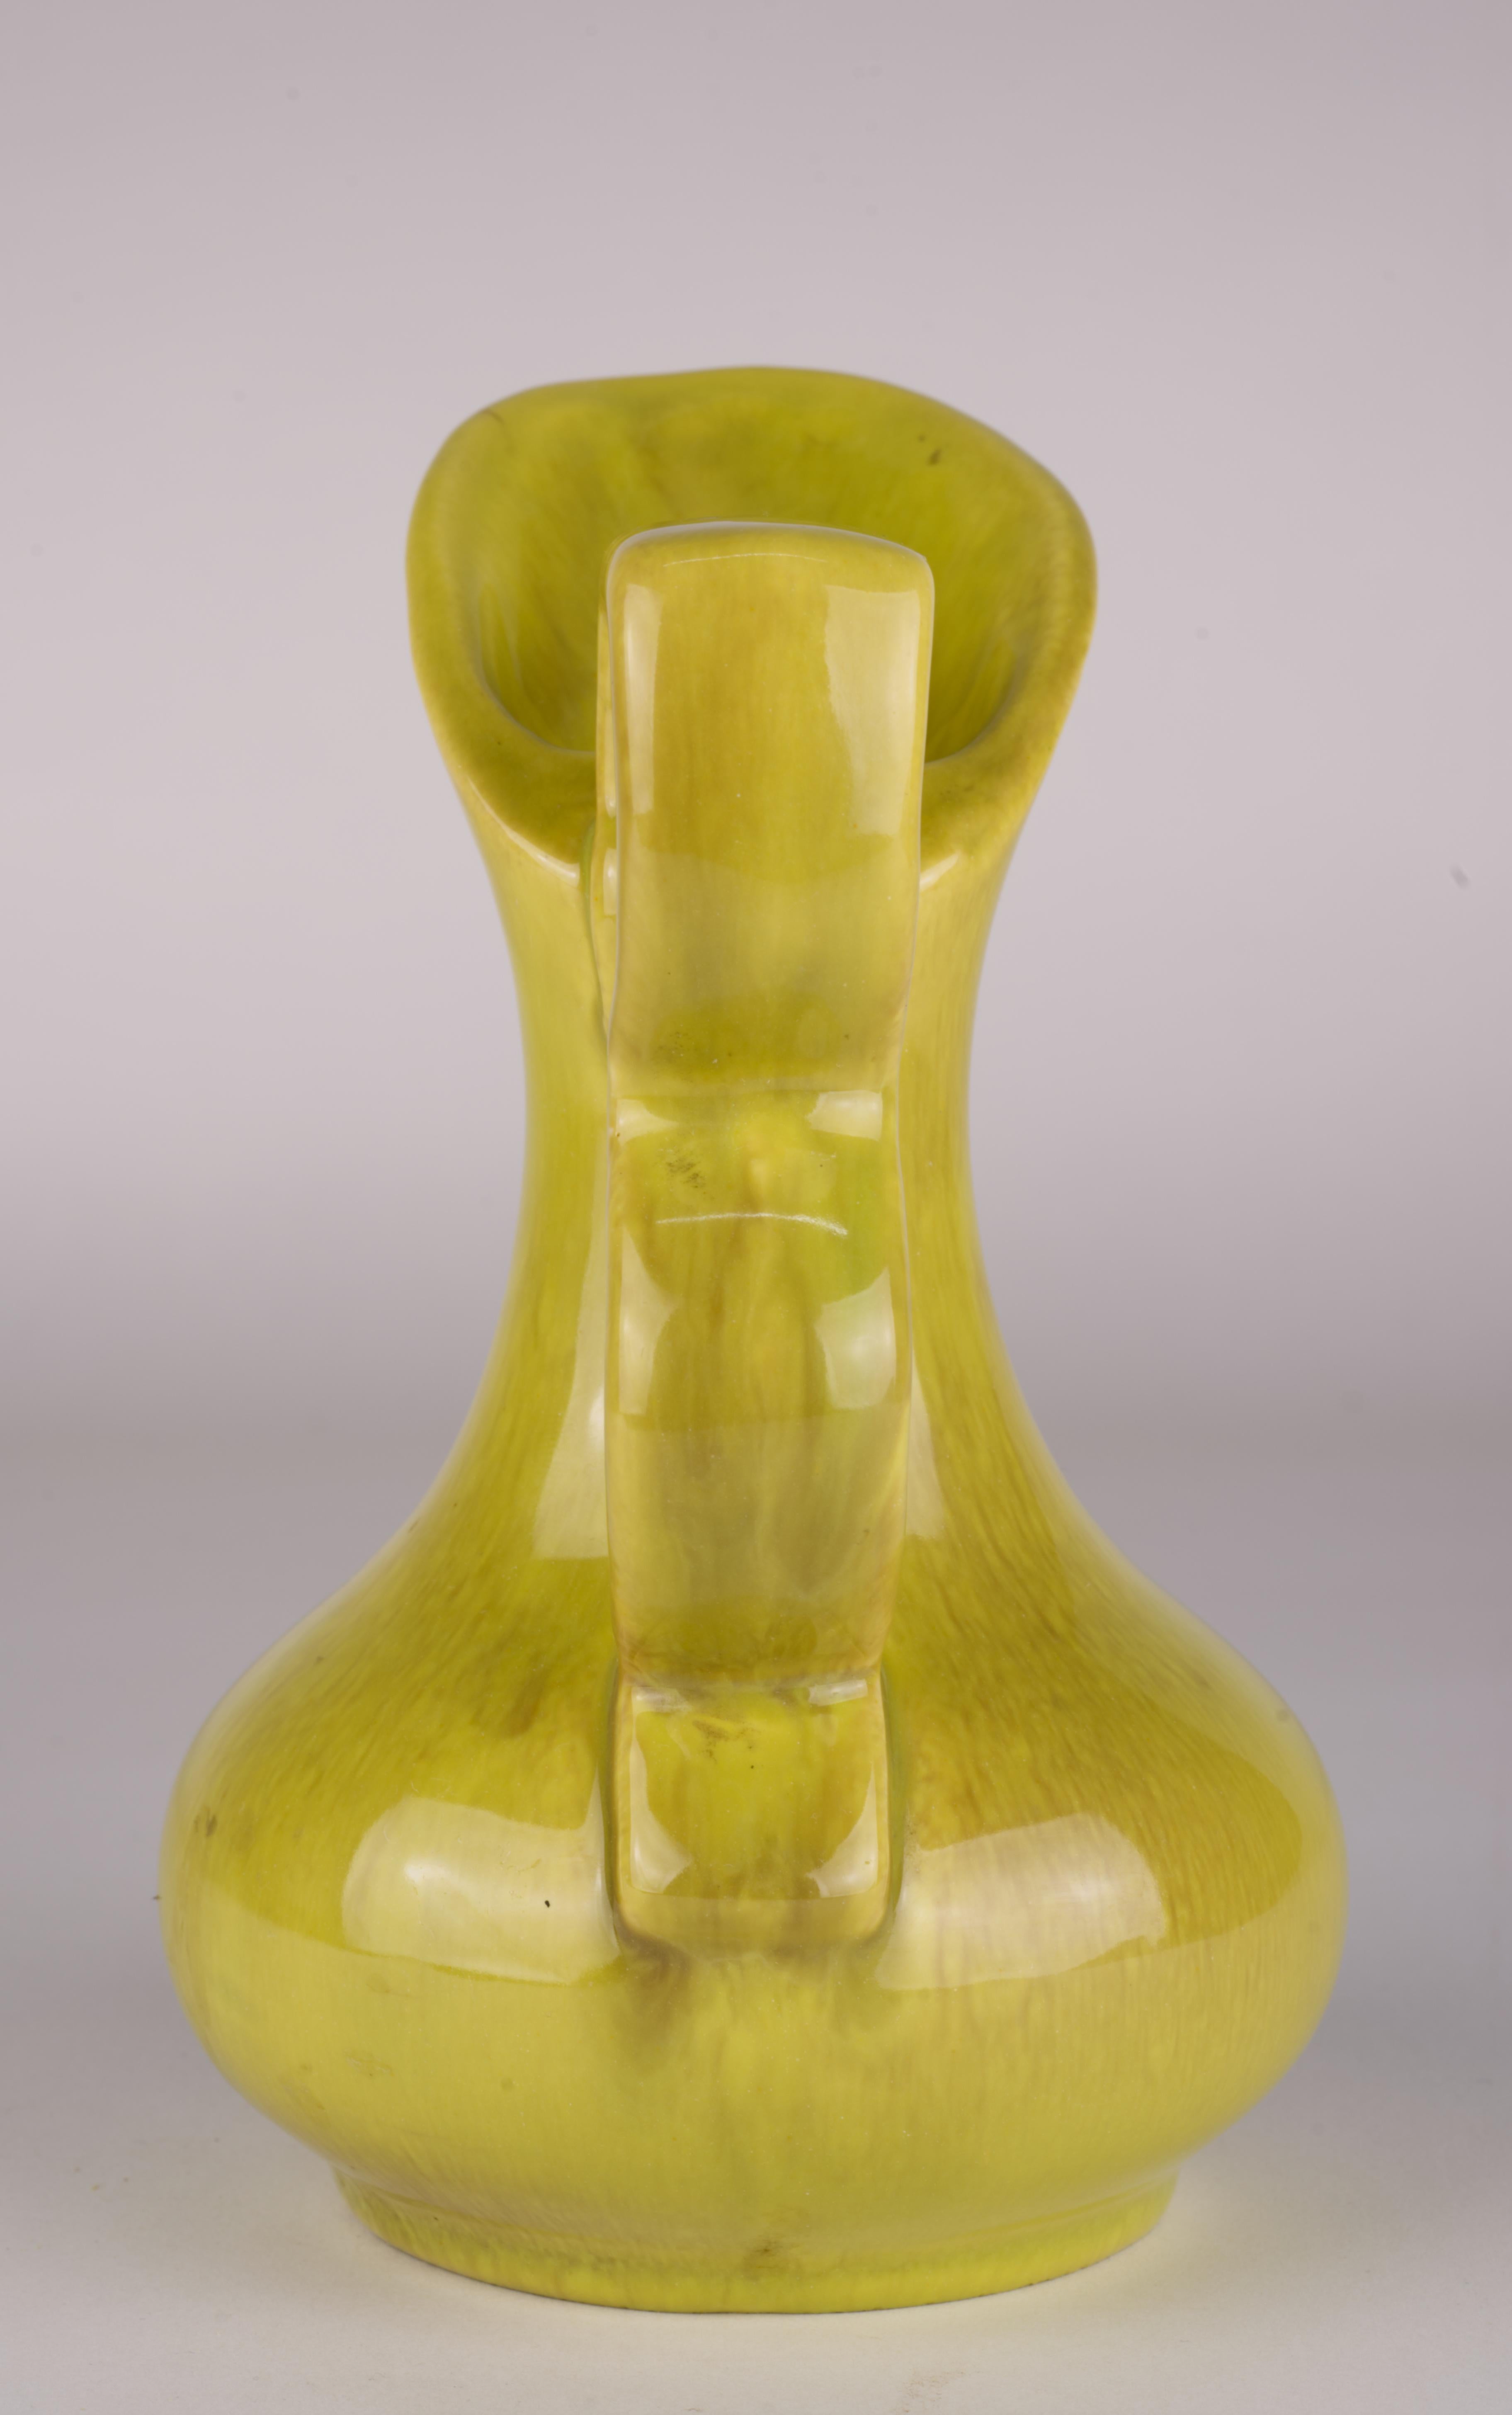 Gonder Pottery Bud Vase Ewer in Chartreuse Drip Glaze 1940s-1950s For Sale 1